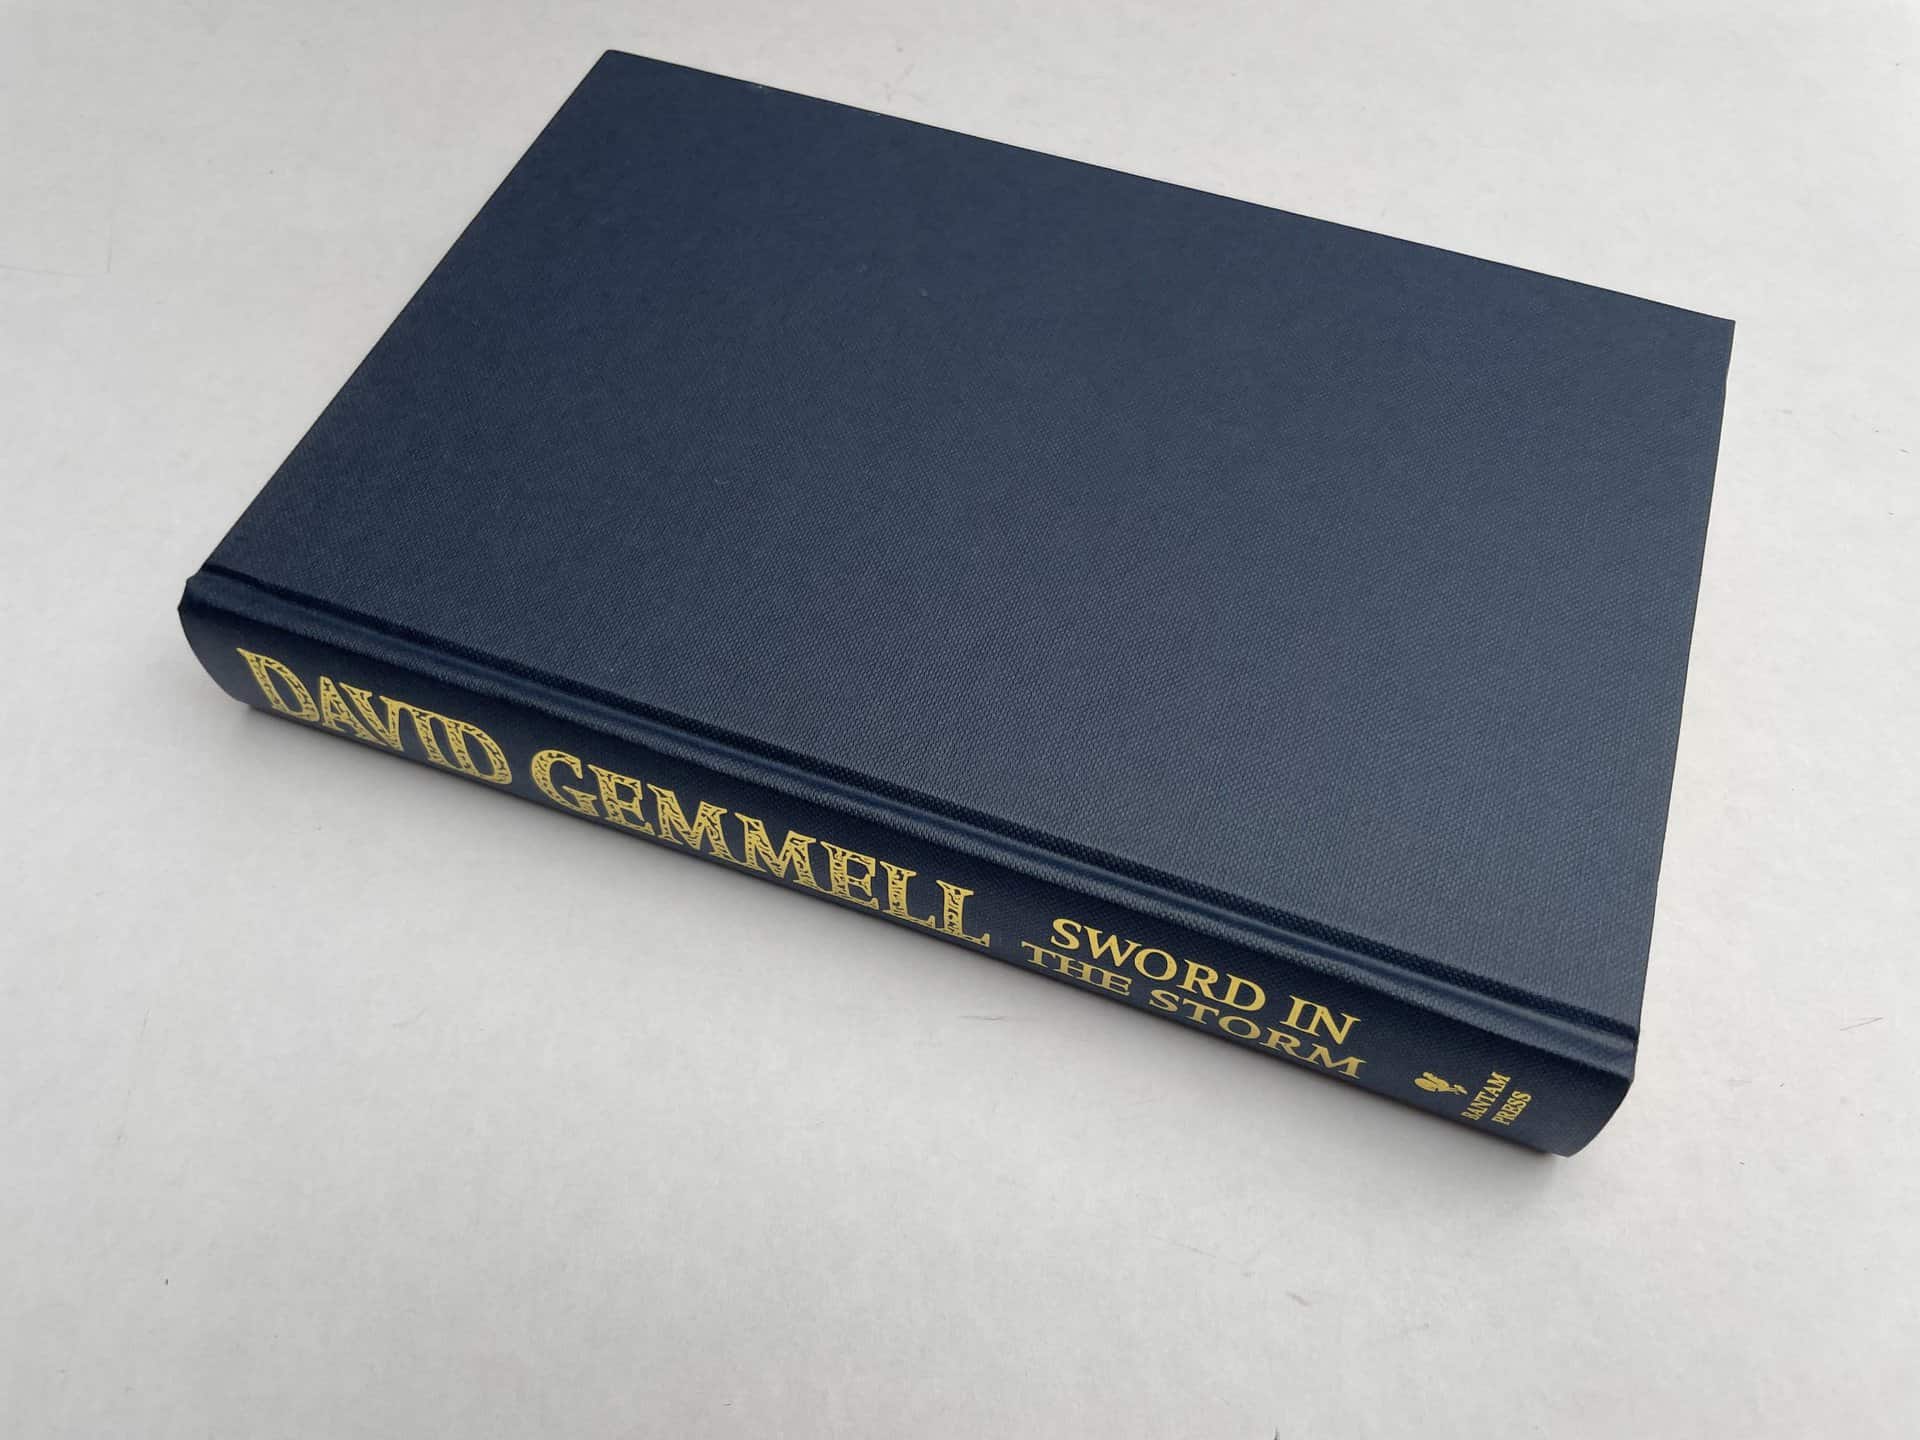 david gemmell sword in the storm first edition3